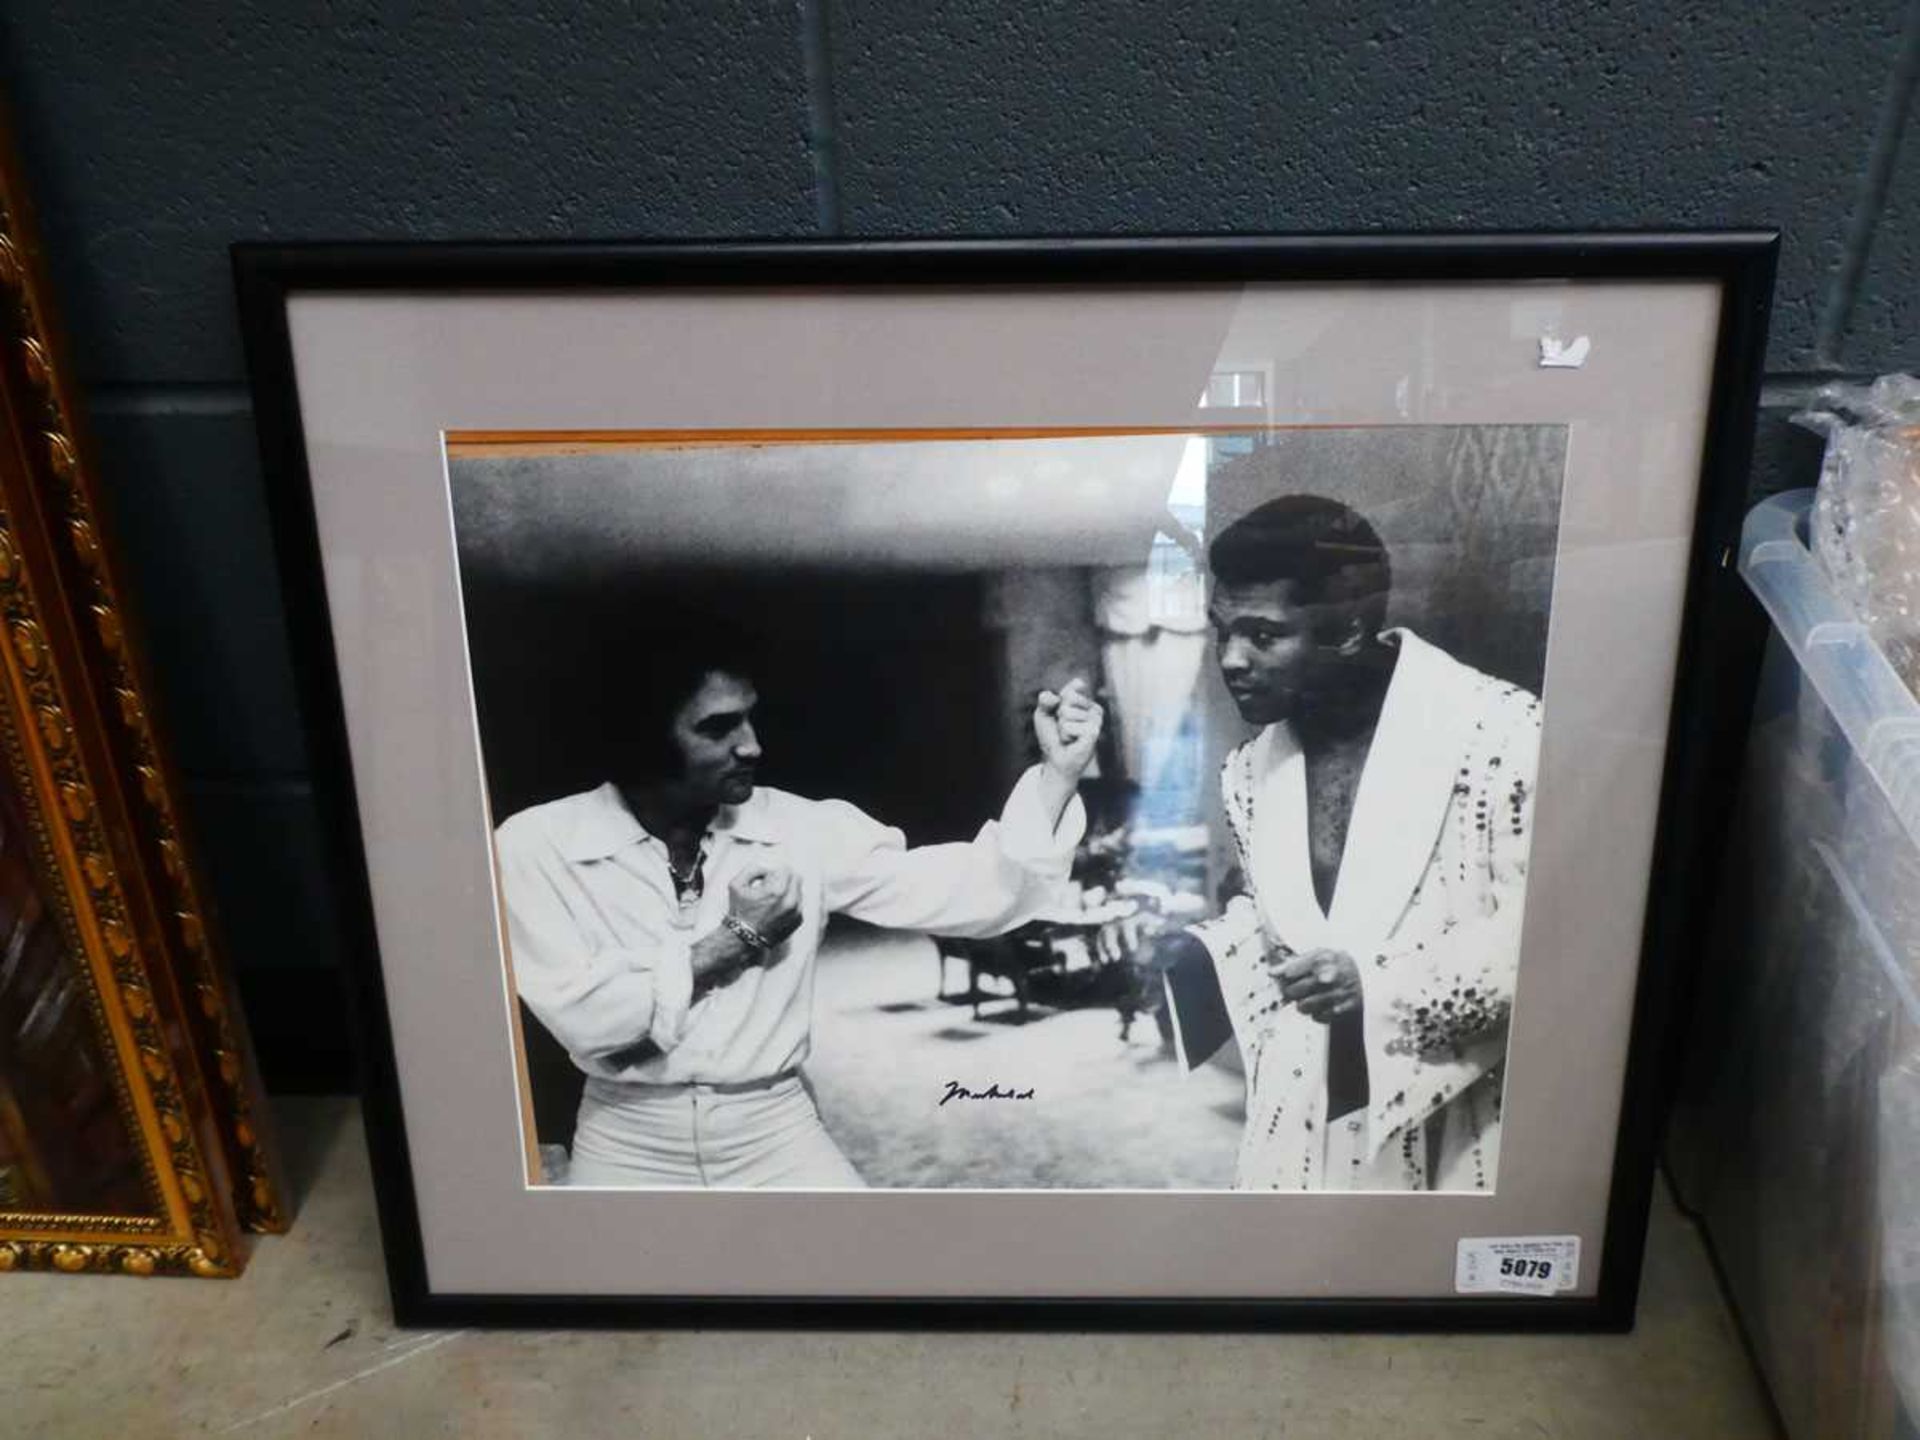 Photographic print of Mohammed Ali and Elvis